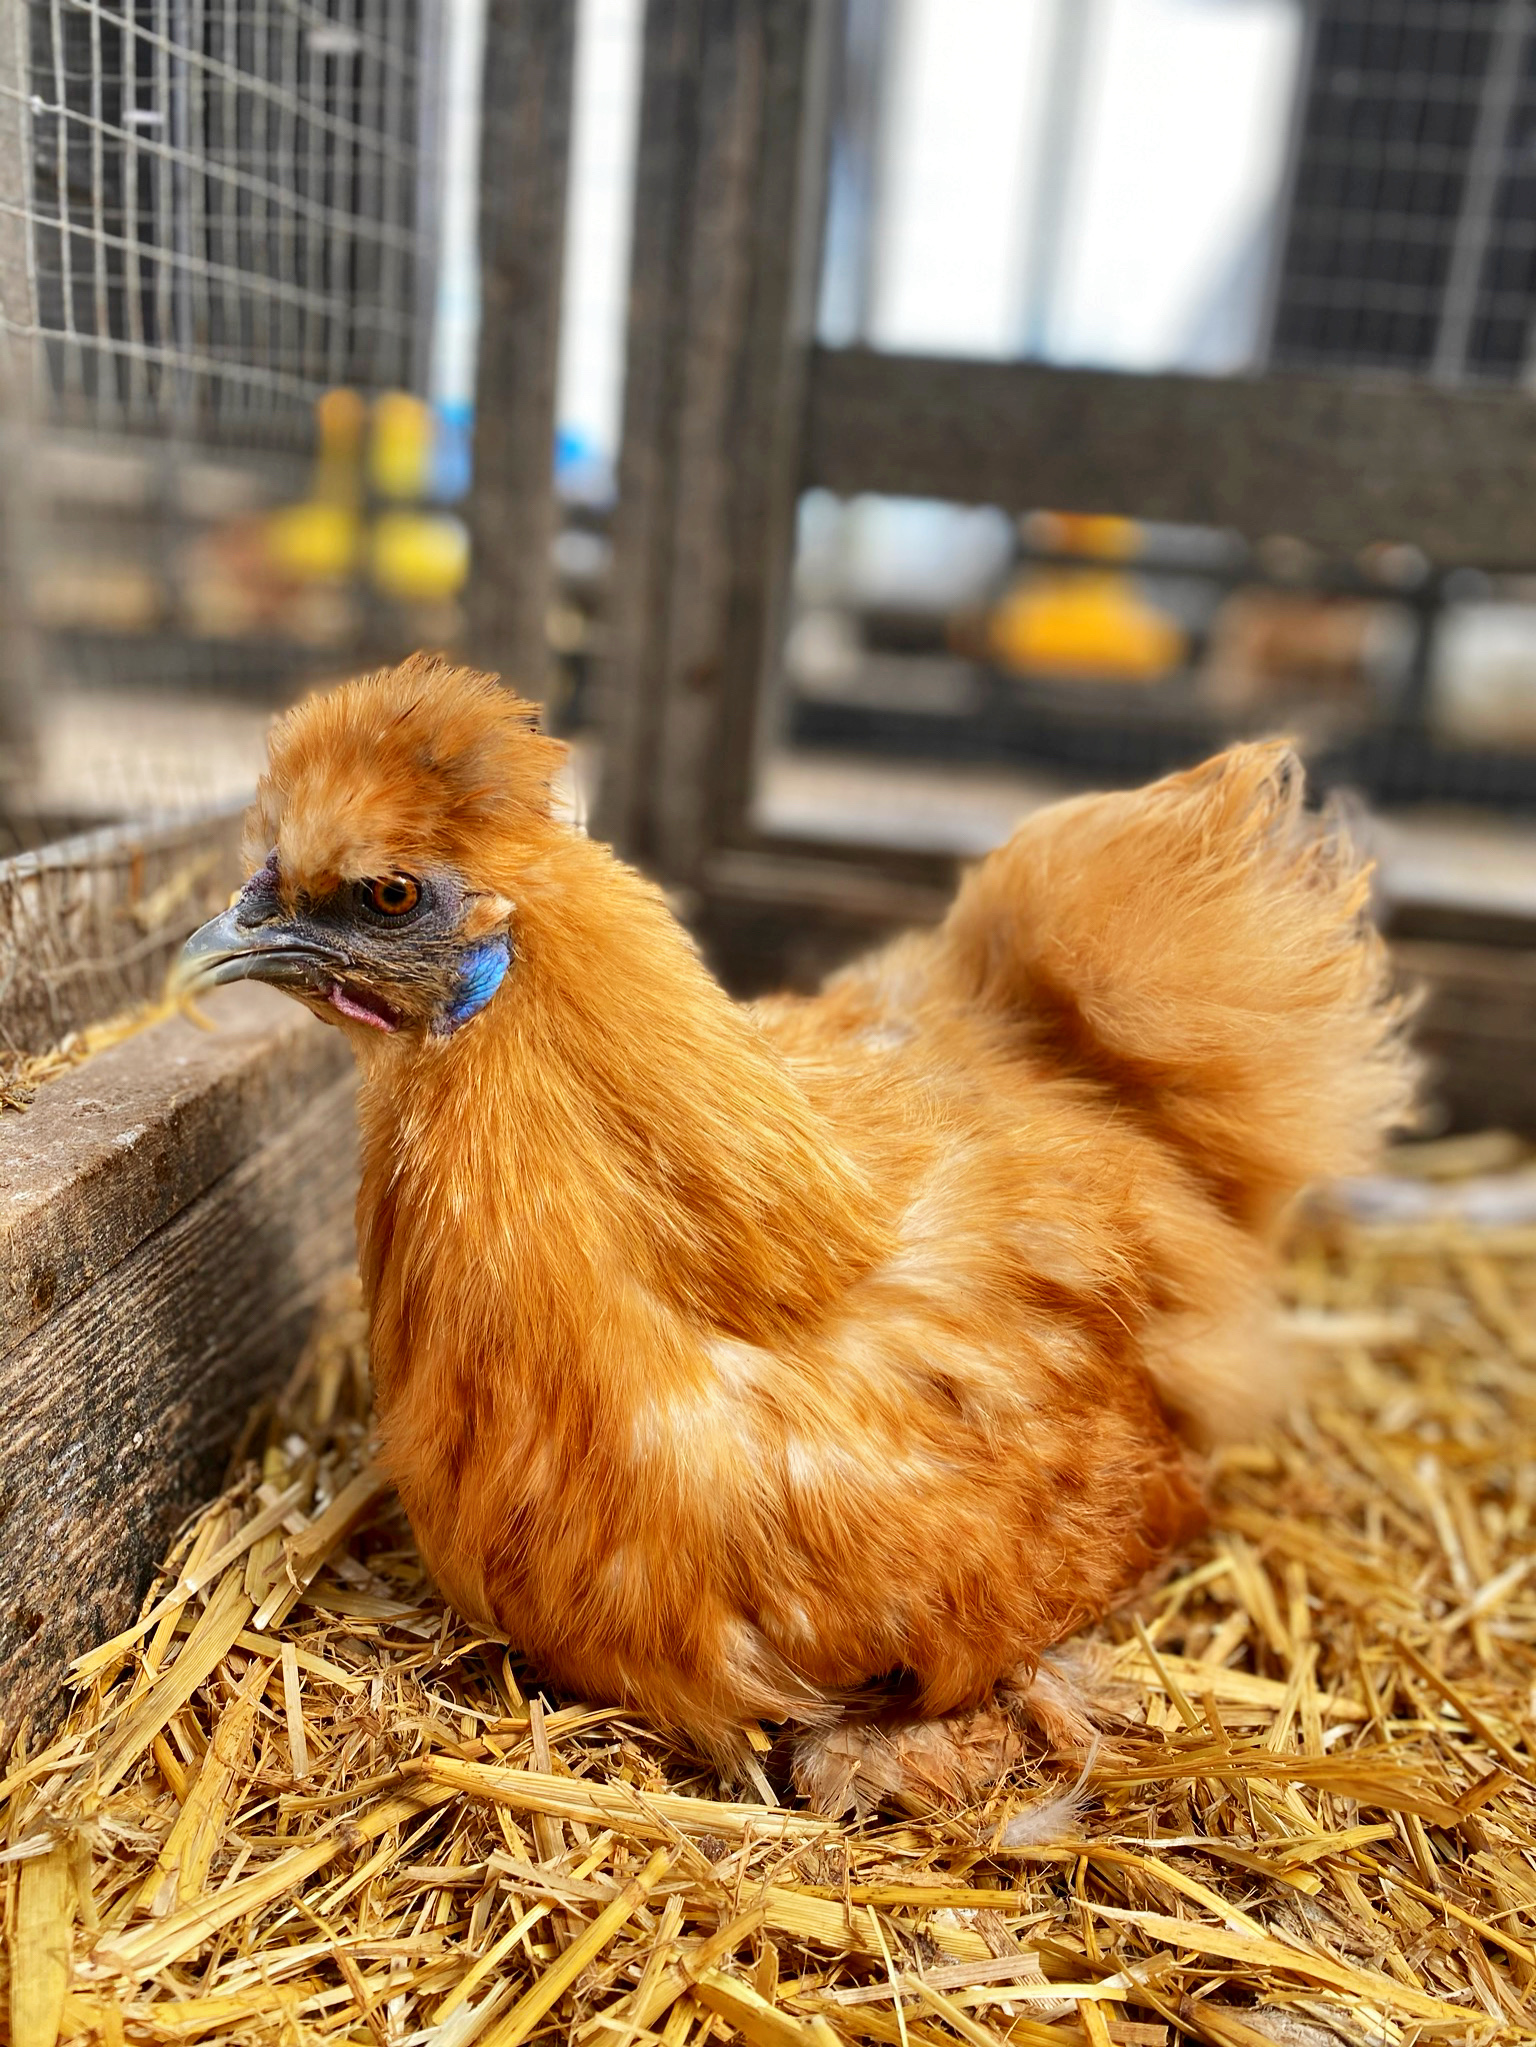 How Much Do Live Chickens Cost in the UK? Find Out the Latest Prices ...